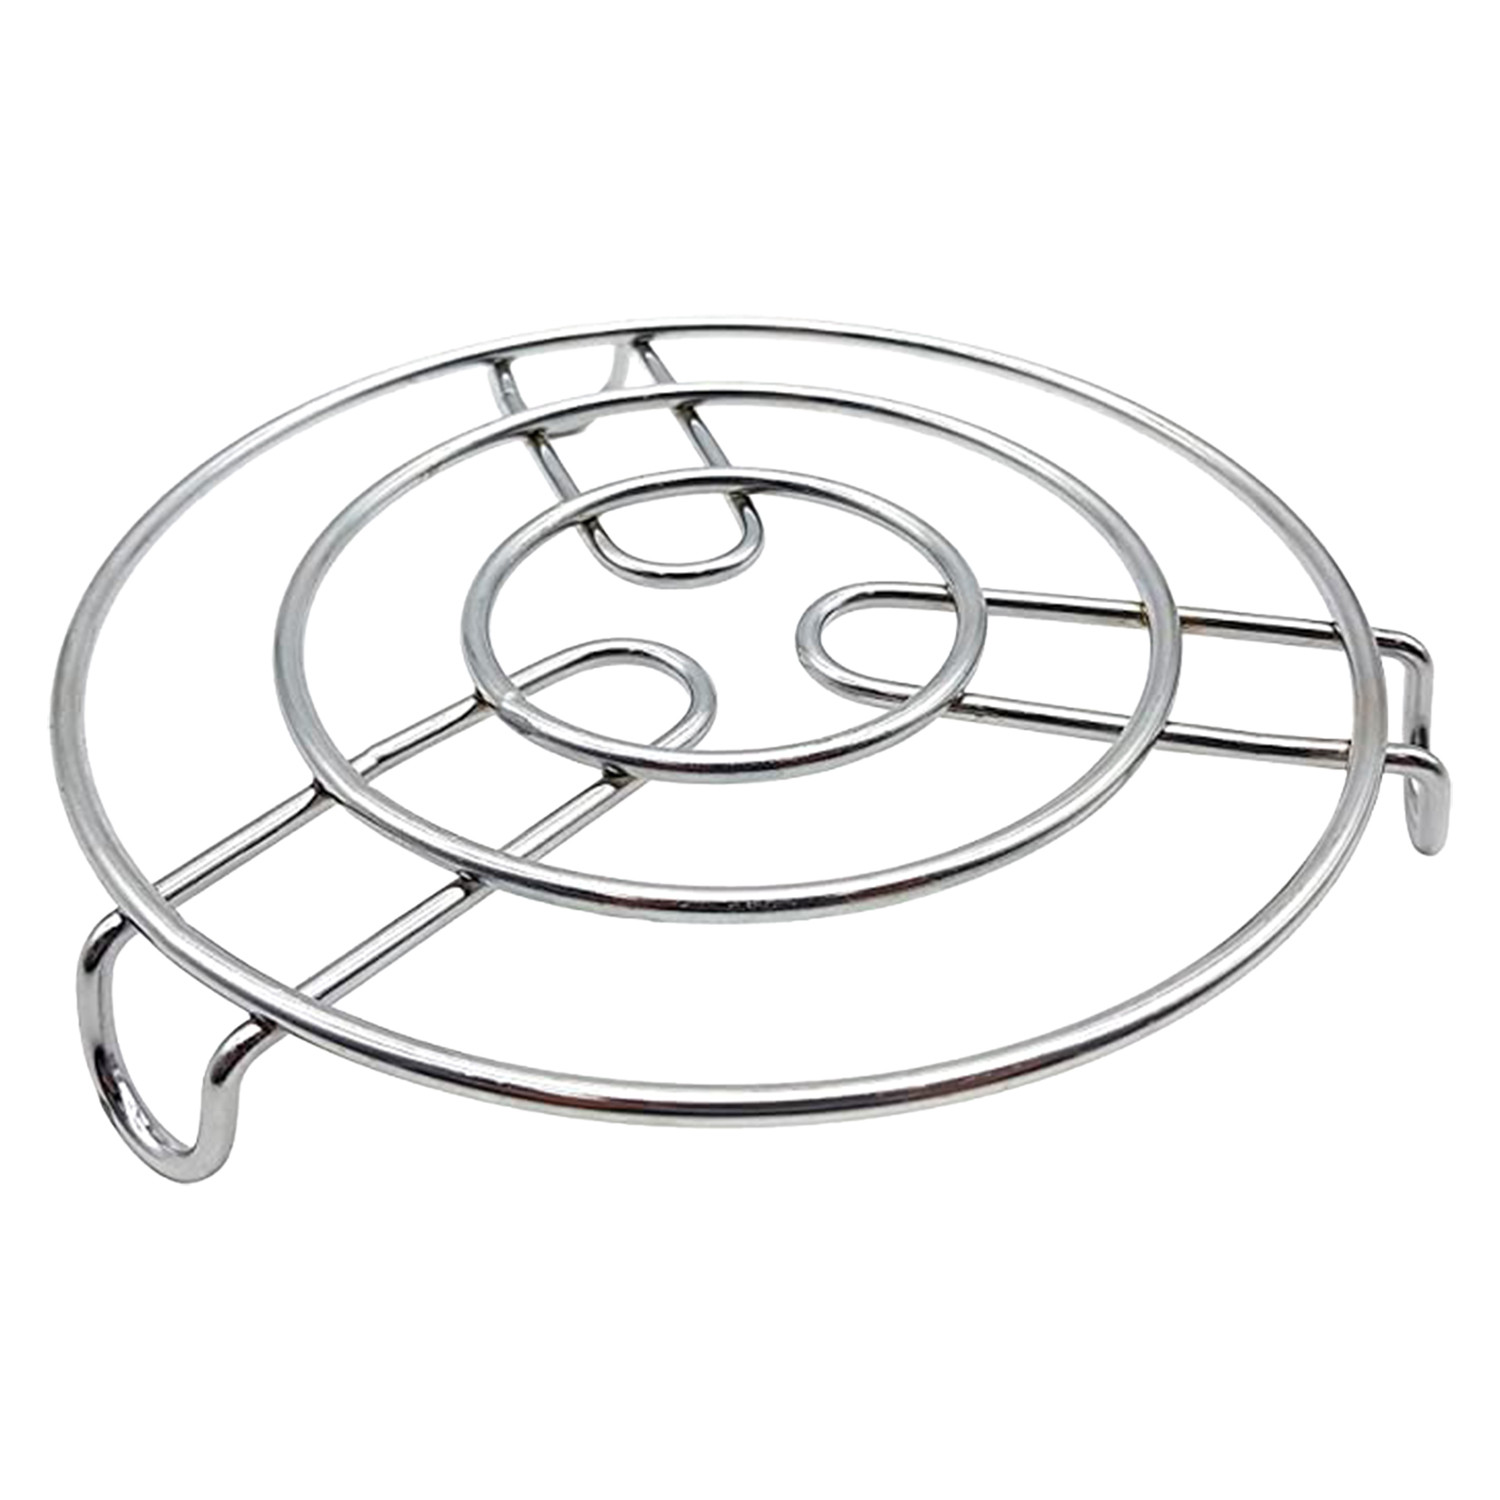 Kuber Industries Iron Stand | Stainless Steel Trivet |Round Steamer Rack for Kitchen | Heat Resistant Hot Plate Dishes Holder | Cooker Donga Stand | Silver